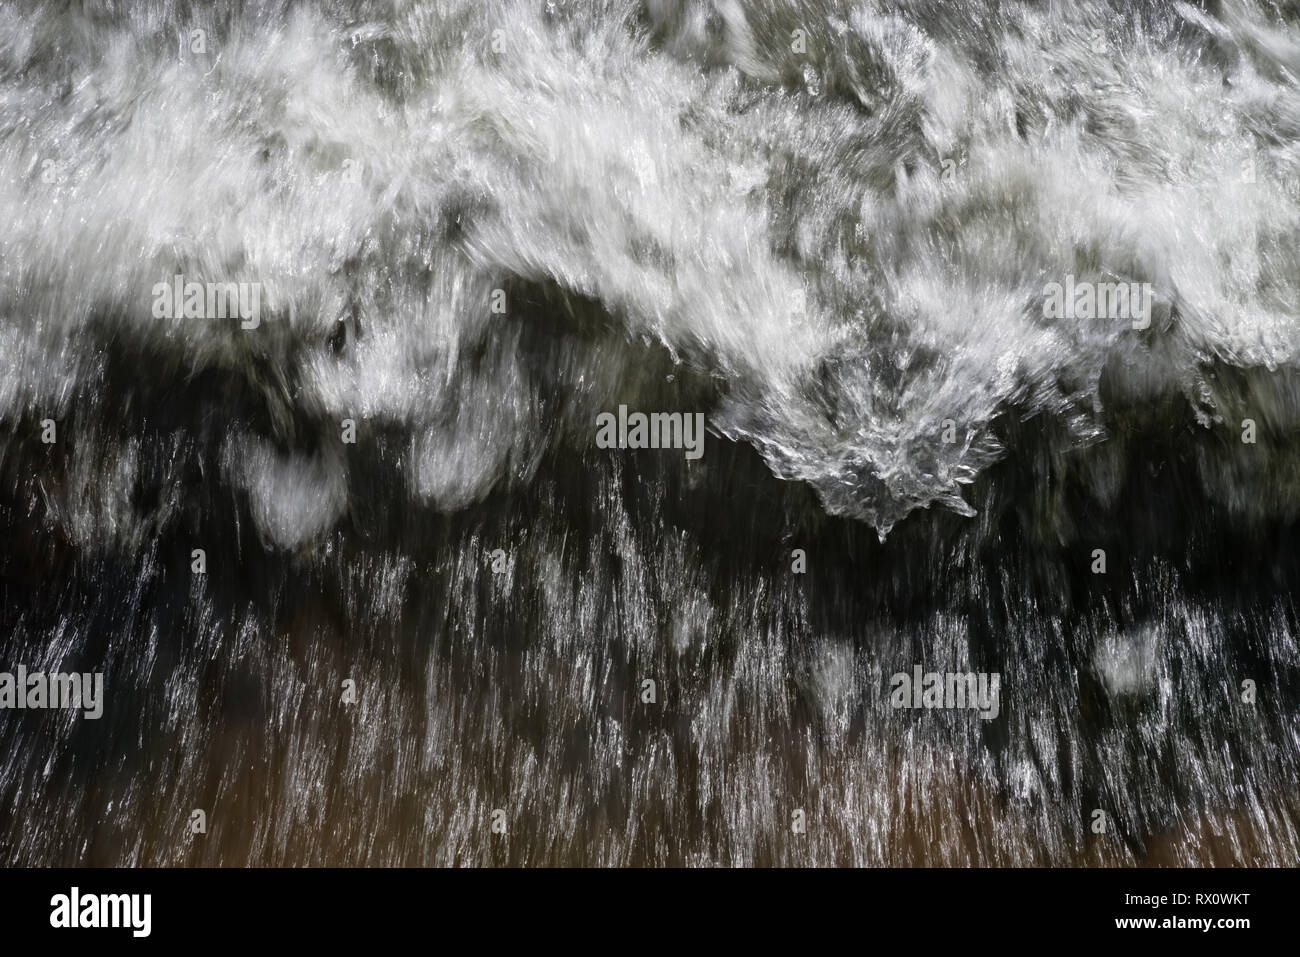 rushing water with motion blur and white waves Stock Photo